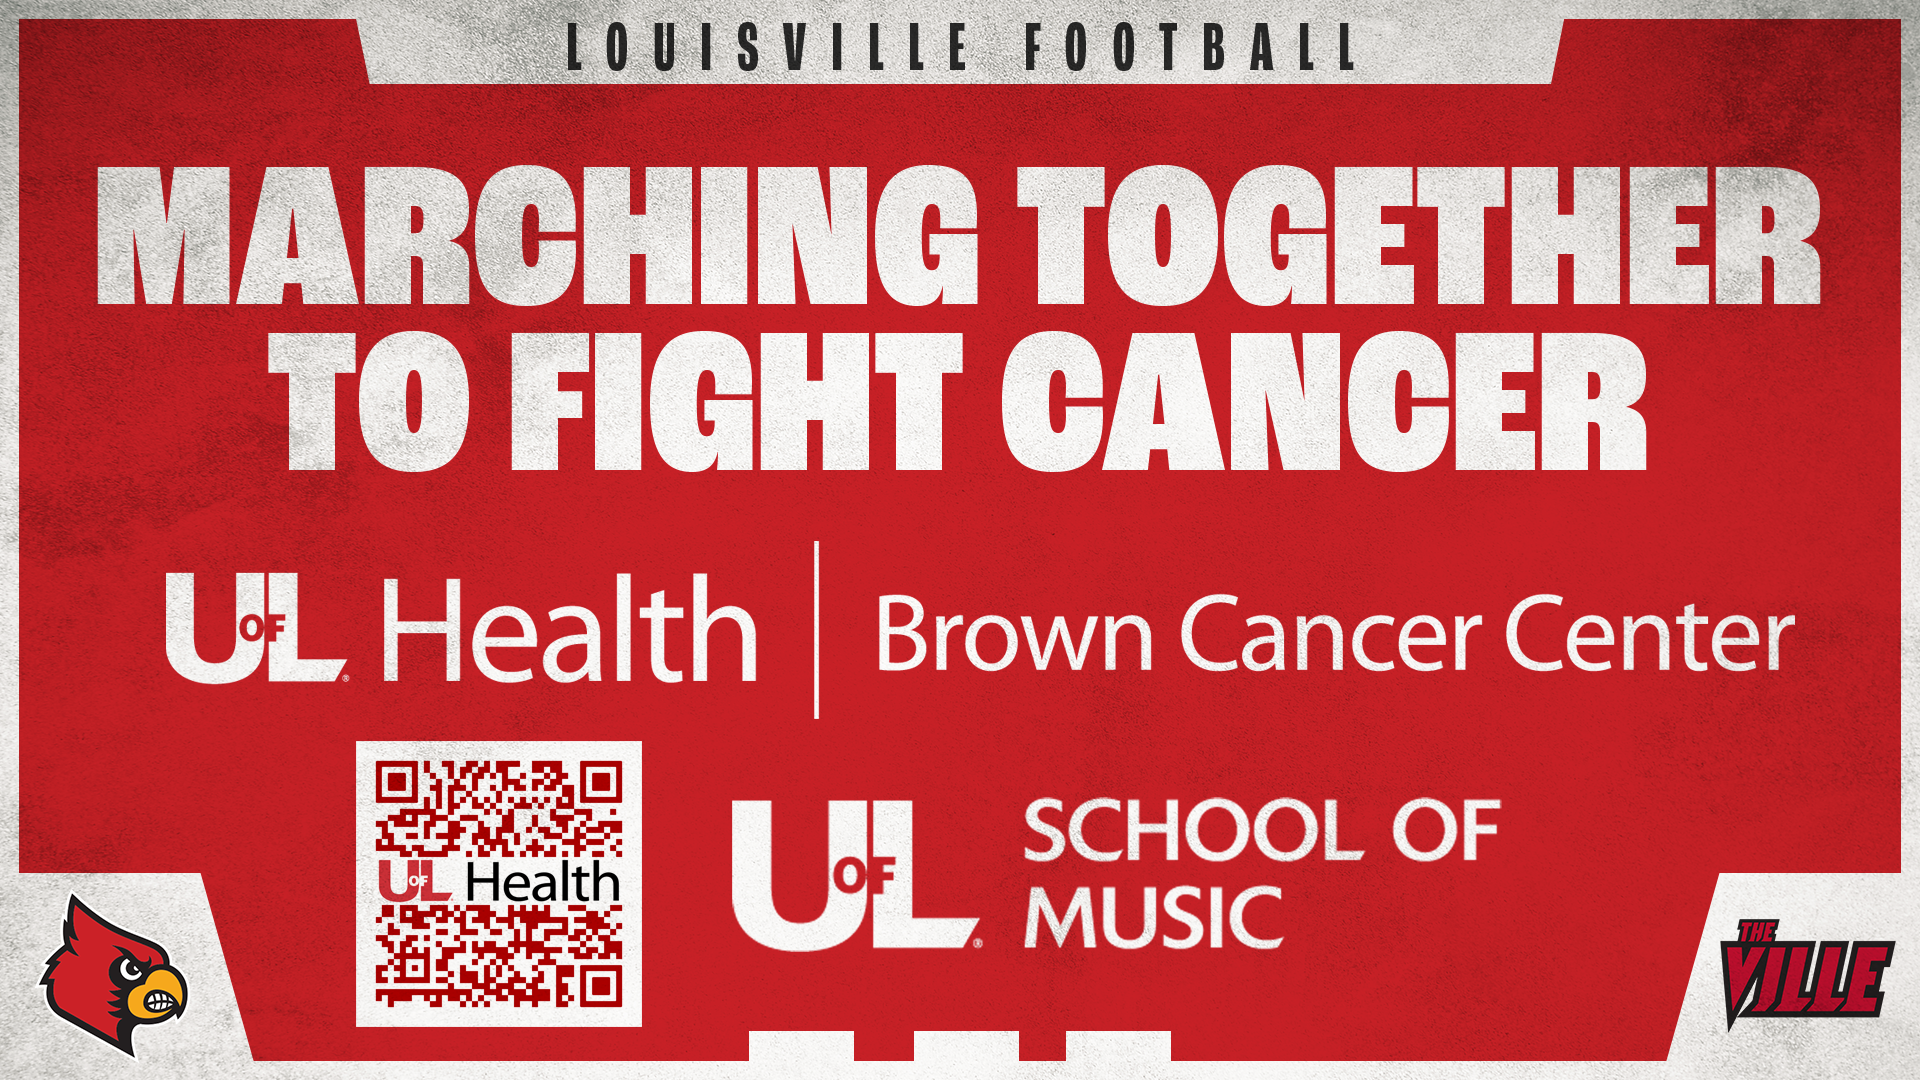 Marching Together to Fight Cancer